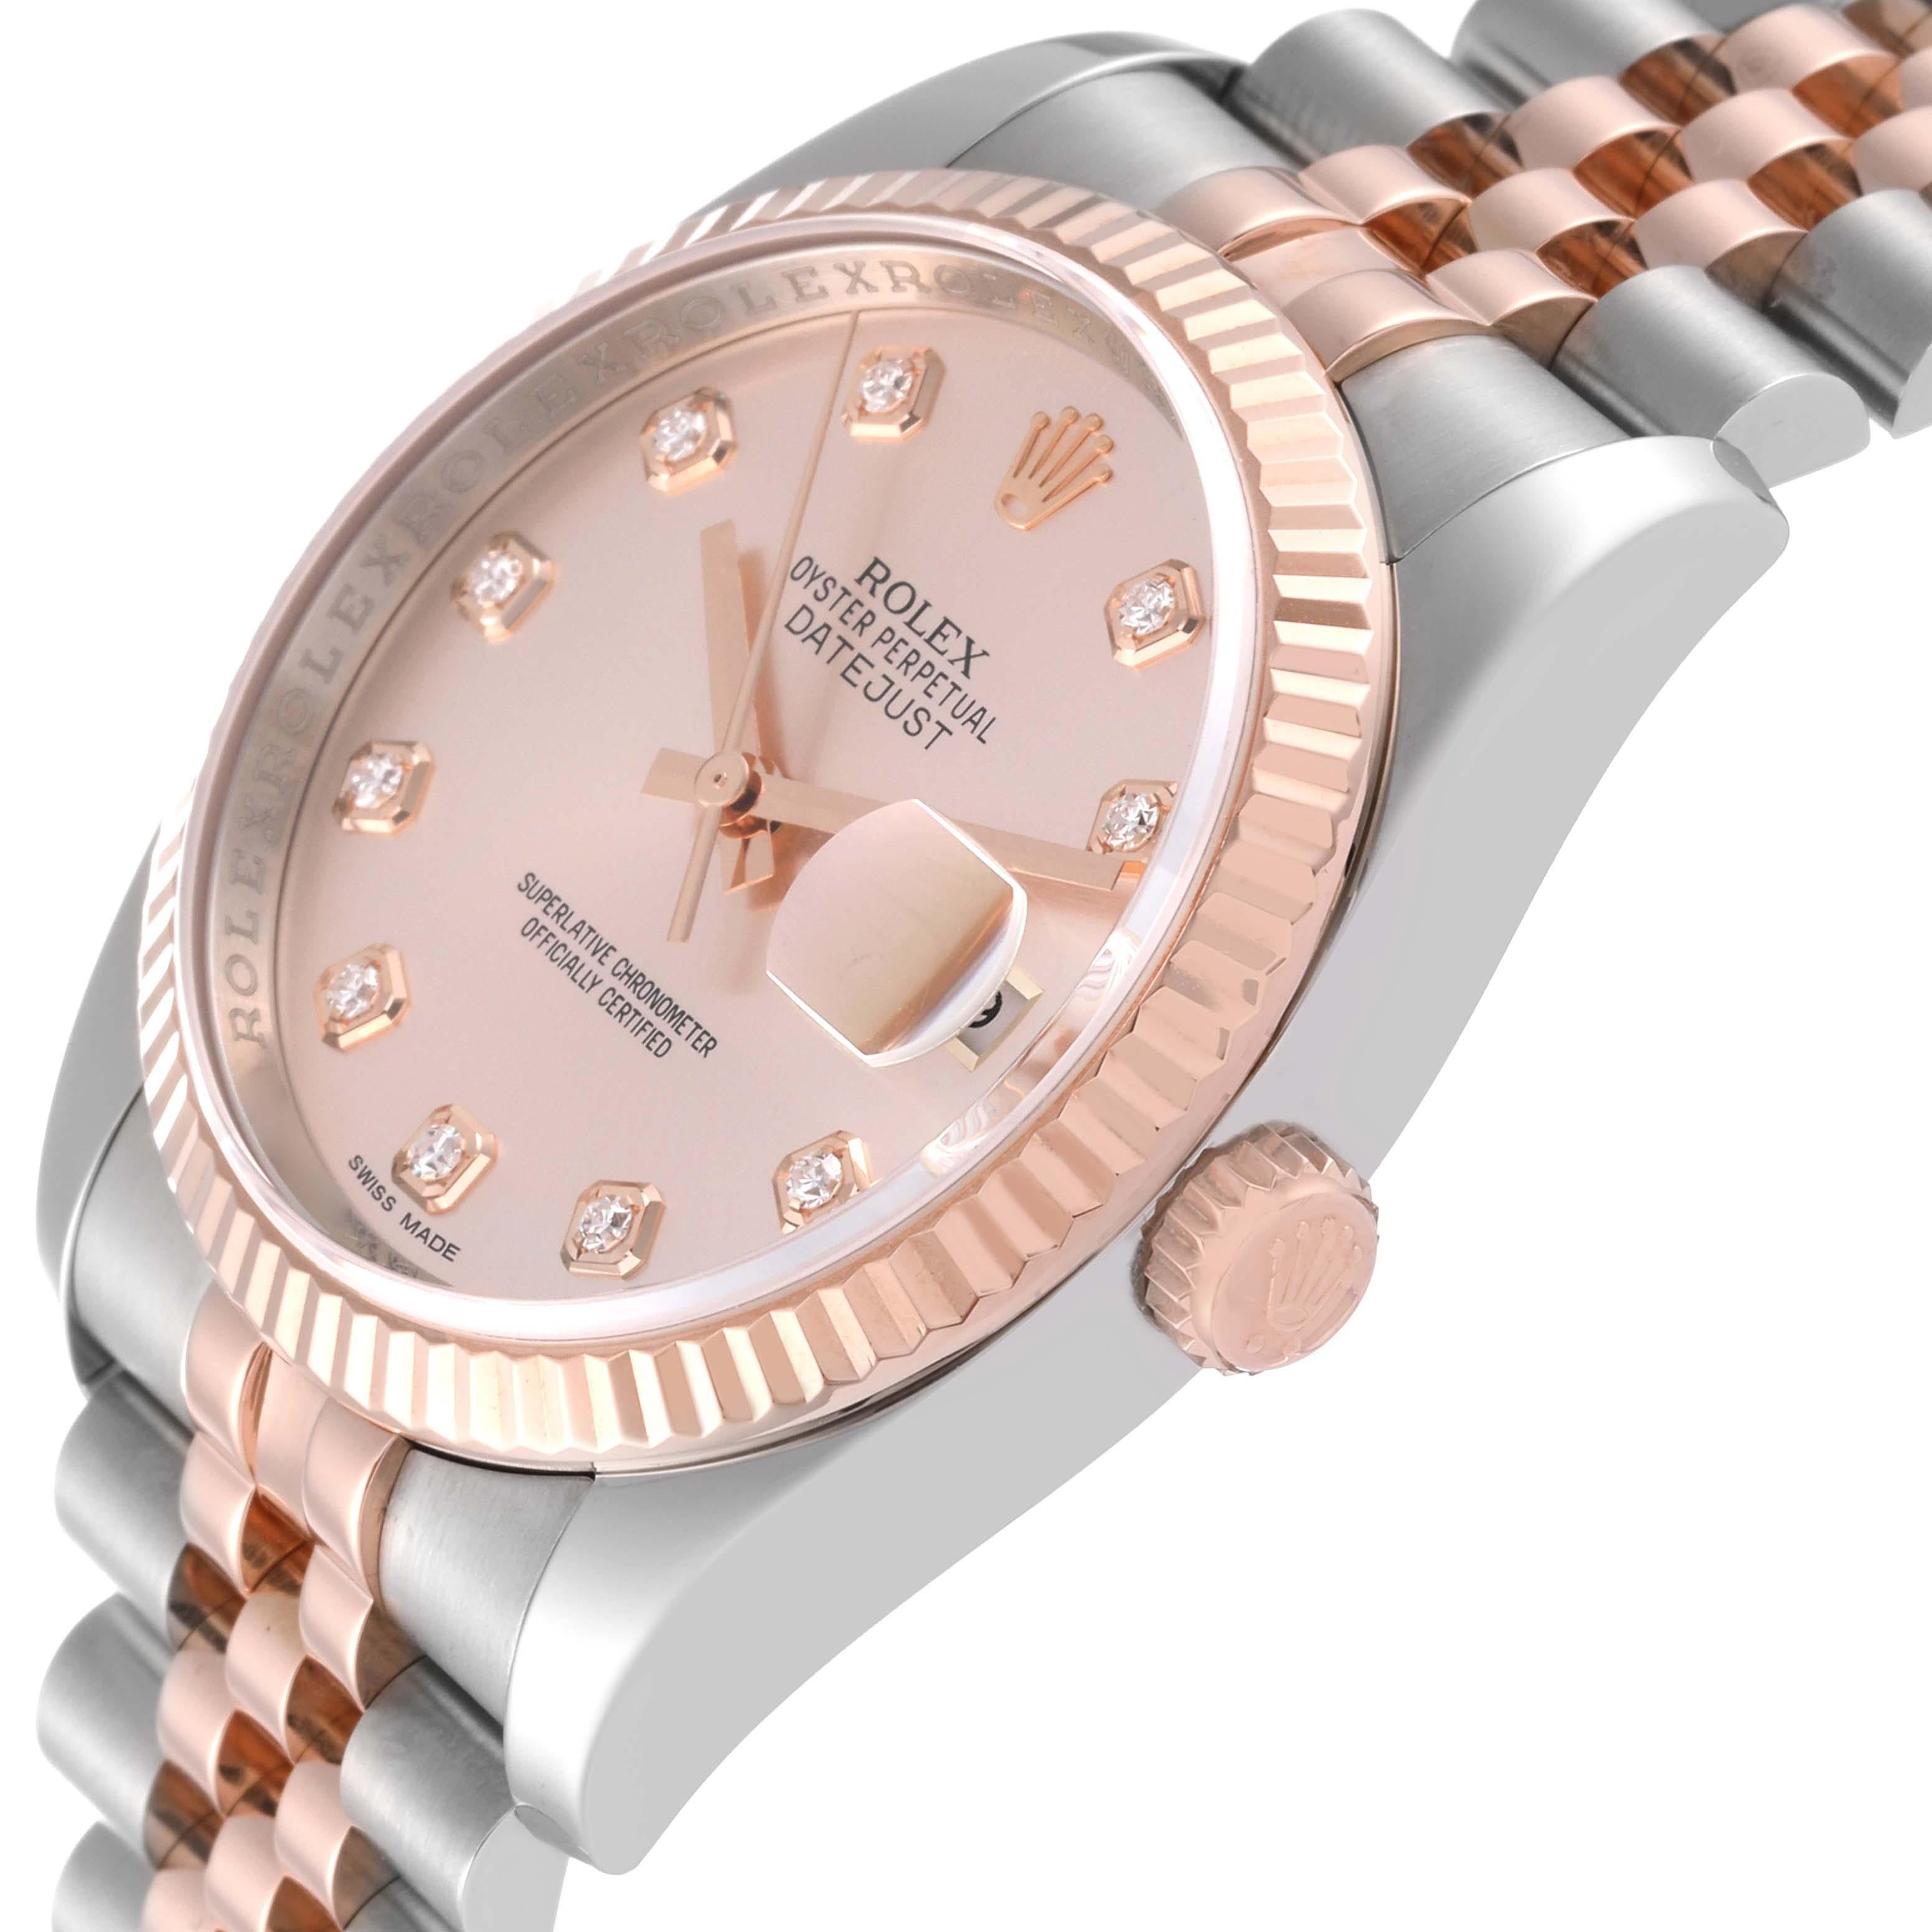 Rolex Datejust Steel Rose Gold Pink Diamond Dial Mens Watch 116231 For Sale 1